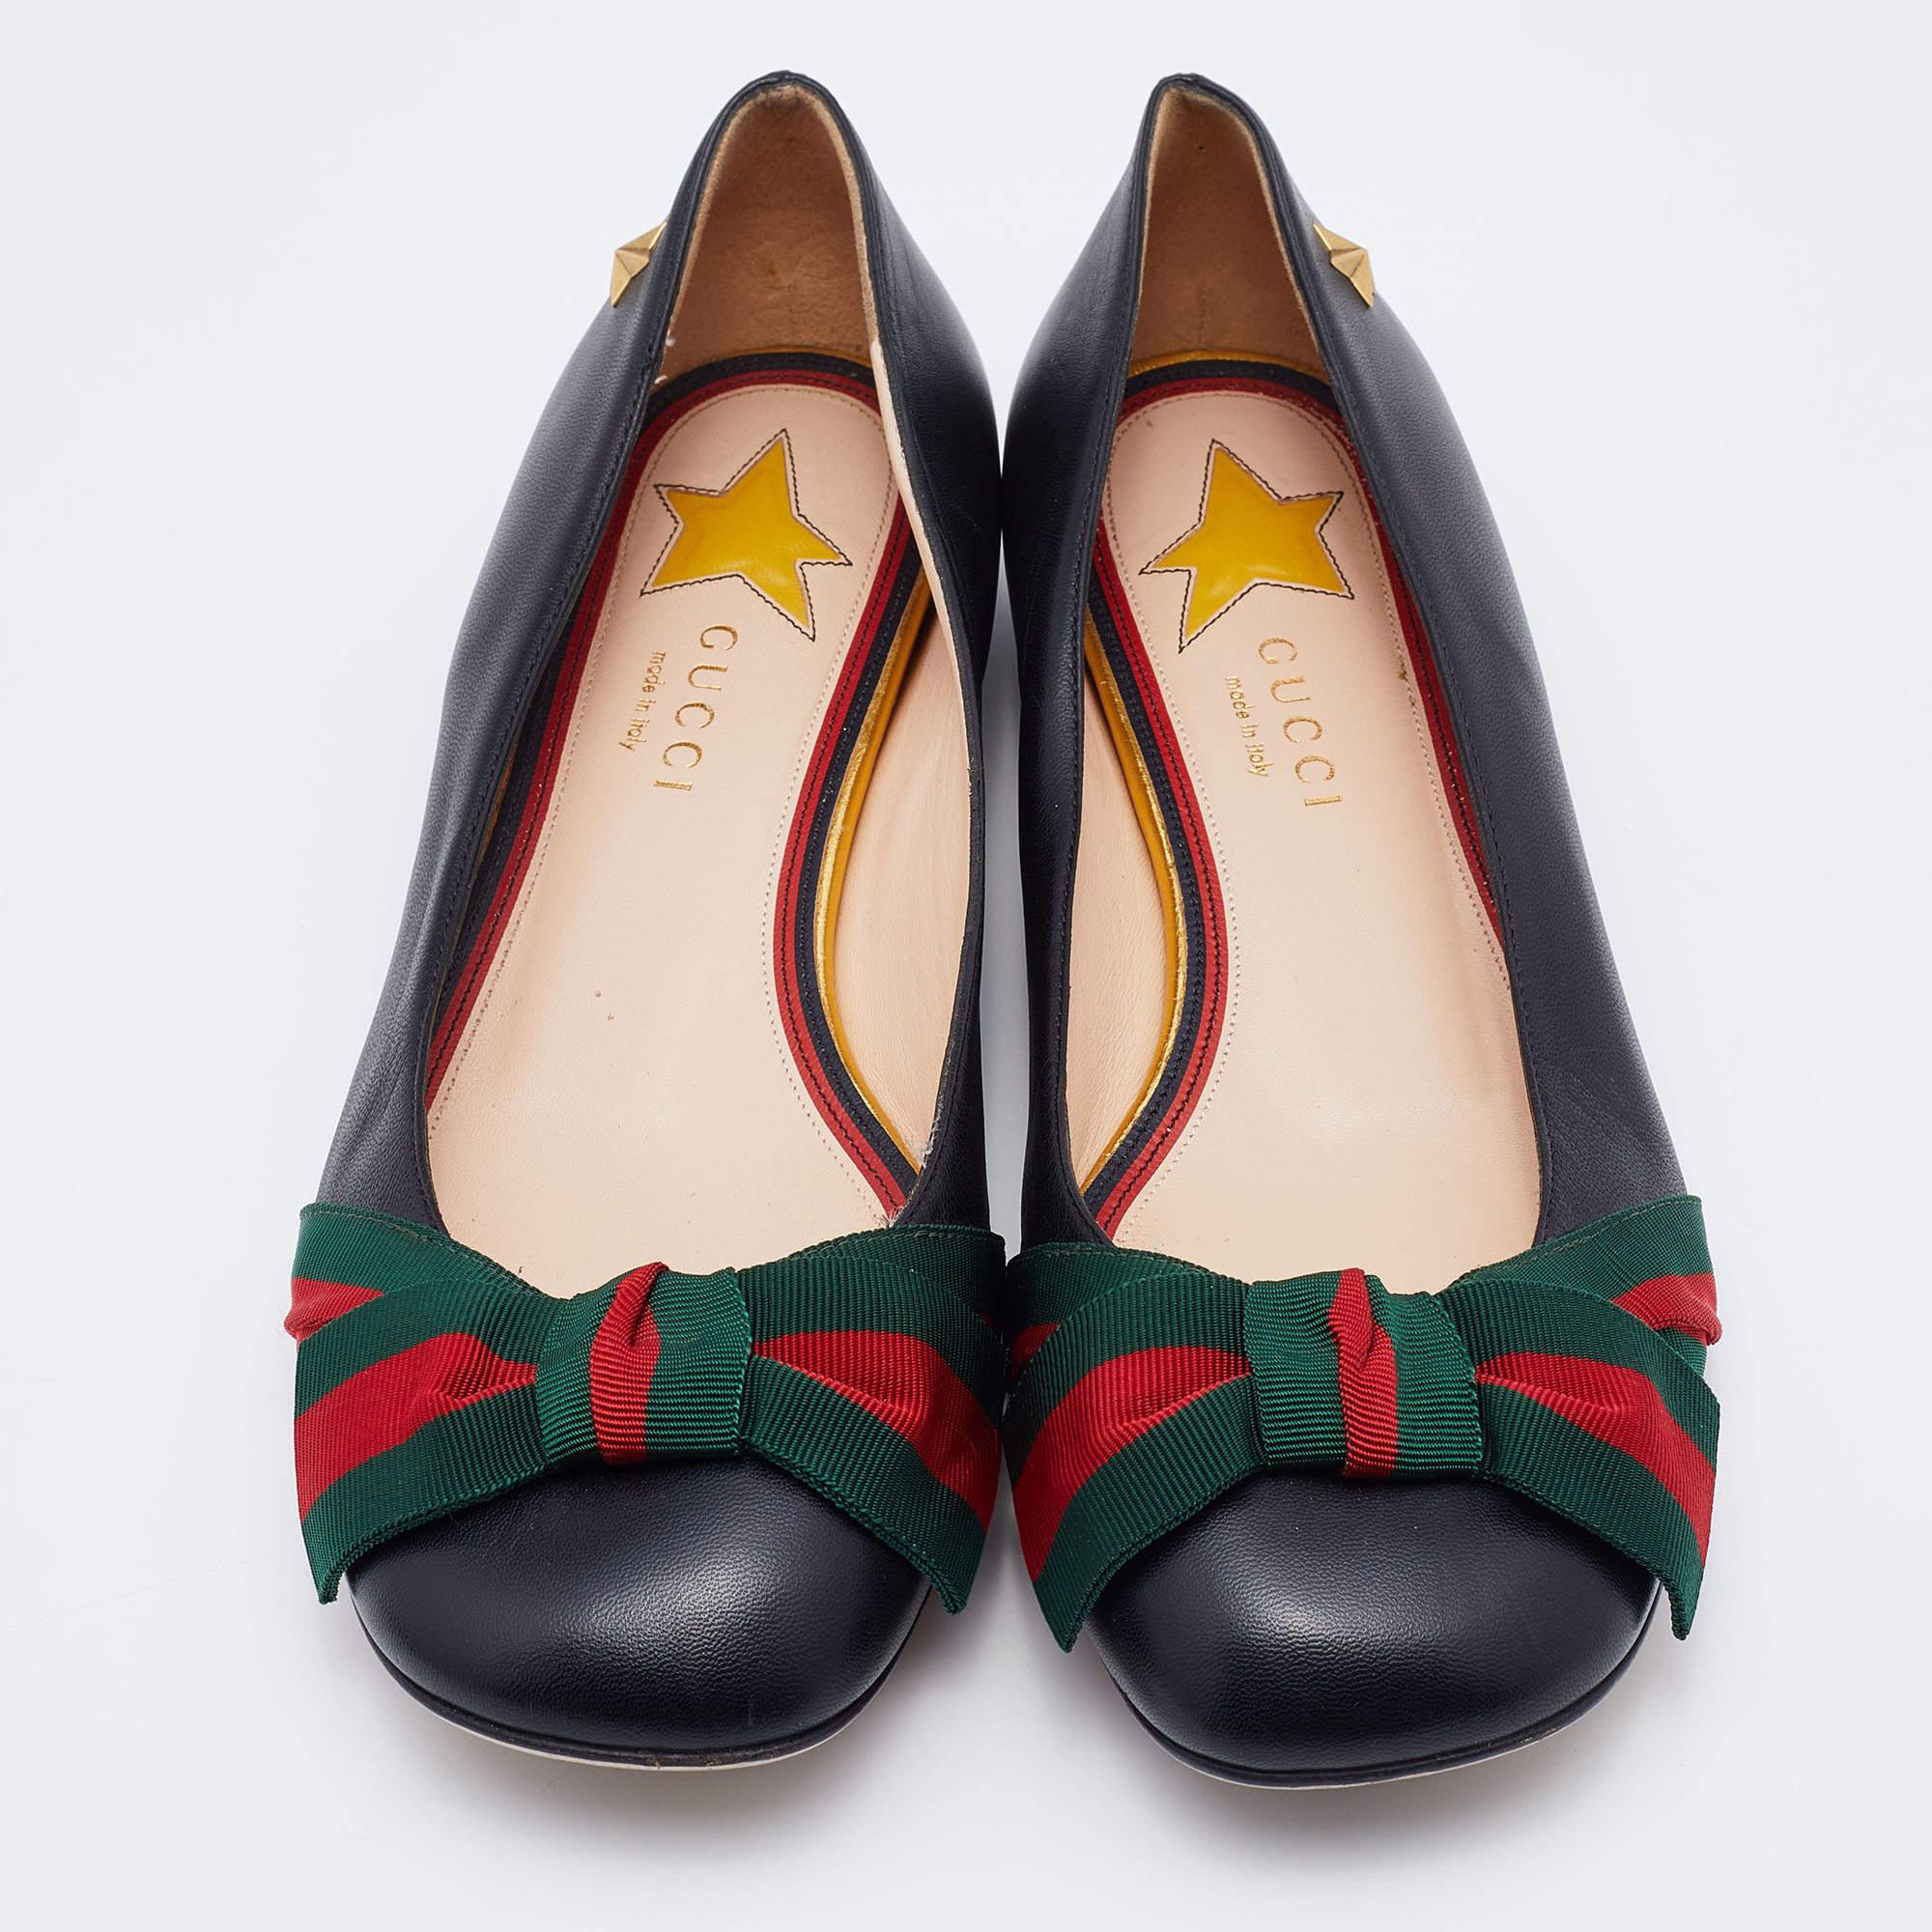 A perfect blend of luxury, style, and comfort. These designer flats are made using prime quality materials and frame your feet in the most elegant way. They can be paired with a host of outfits from your wardrobe.

Includes
Original Dustbag